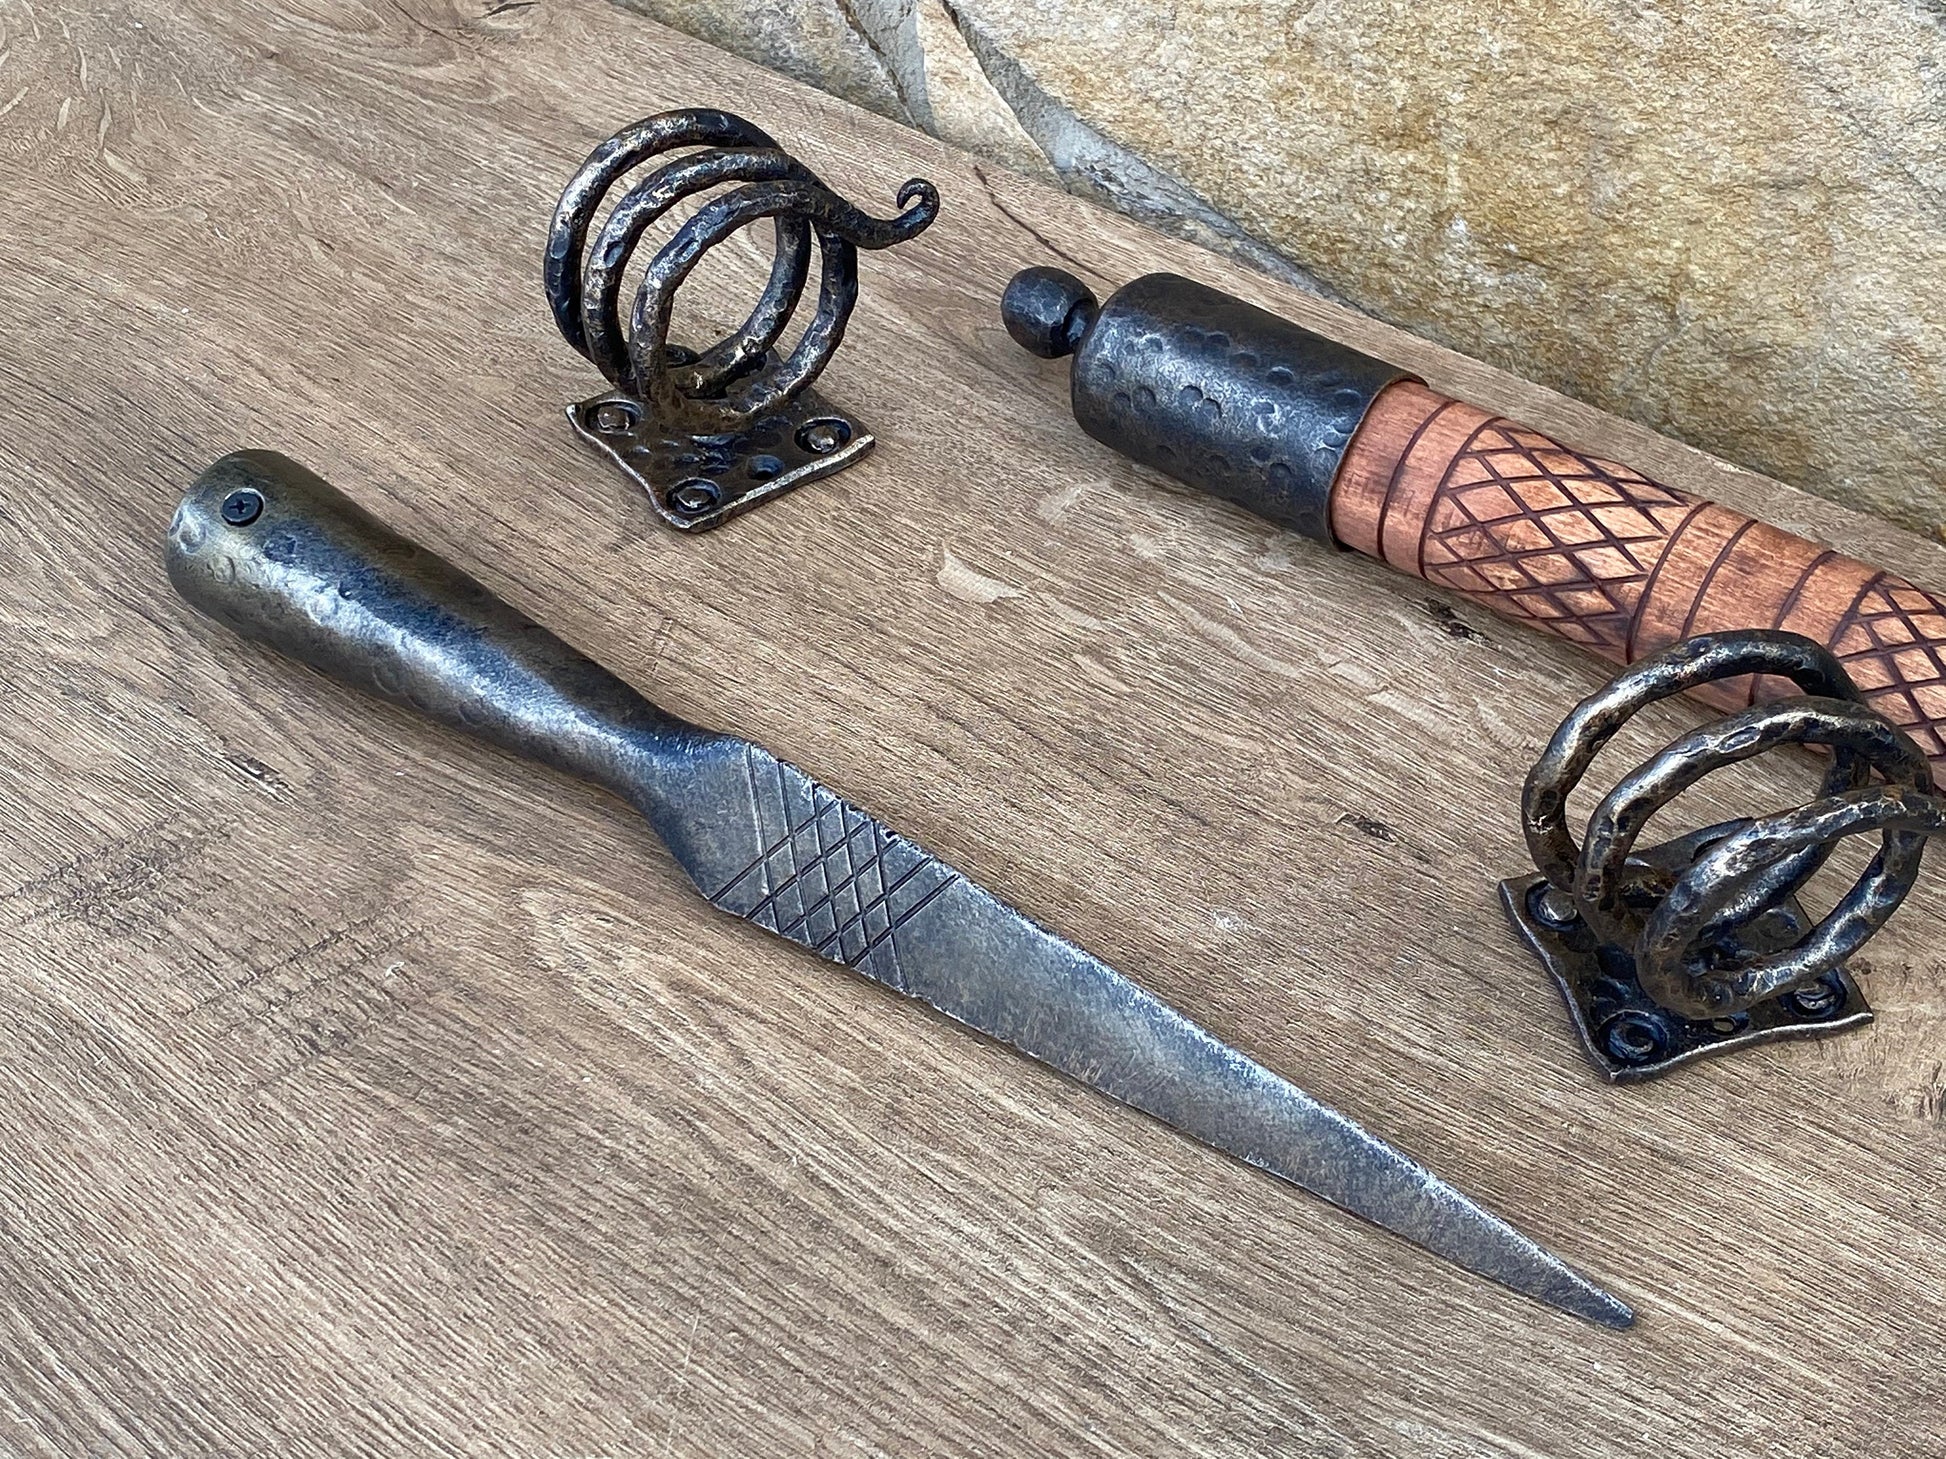 Viking spear, spear, viking weapon, runic, armor, runes, viking axe, medieval spear, medieval, knight, antique, vintage, armor, shield, axe